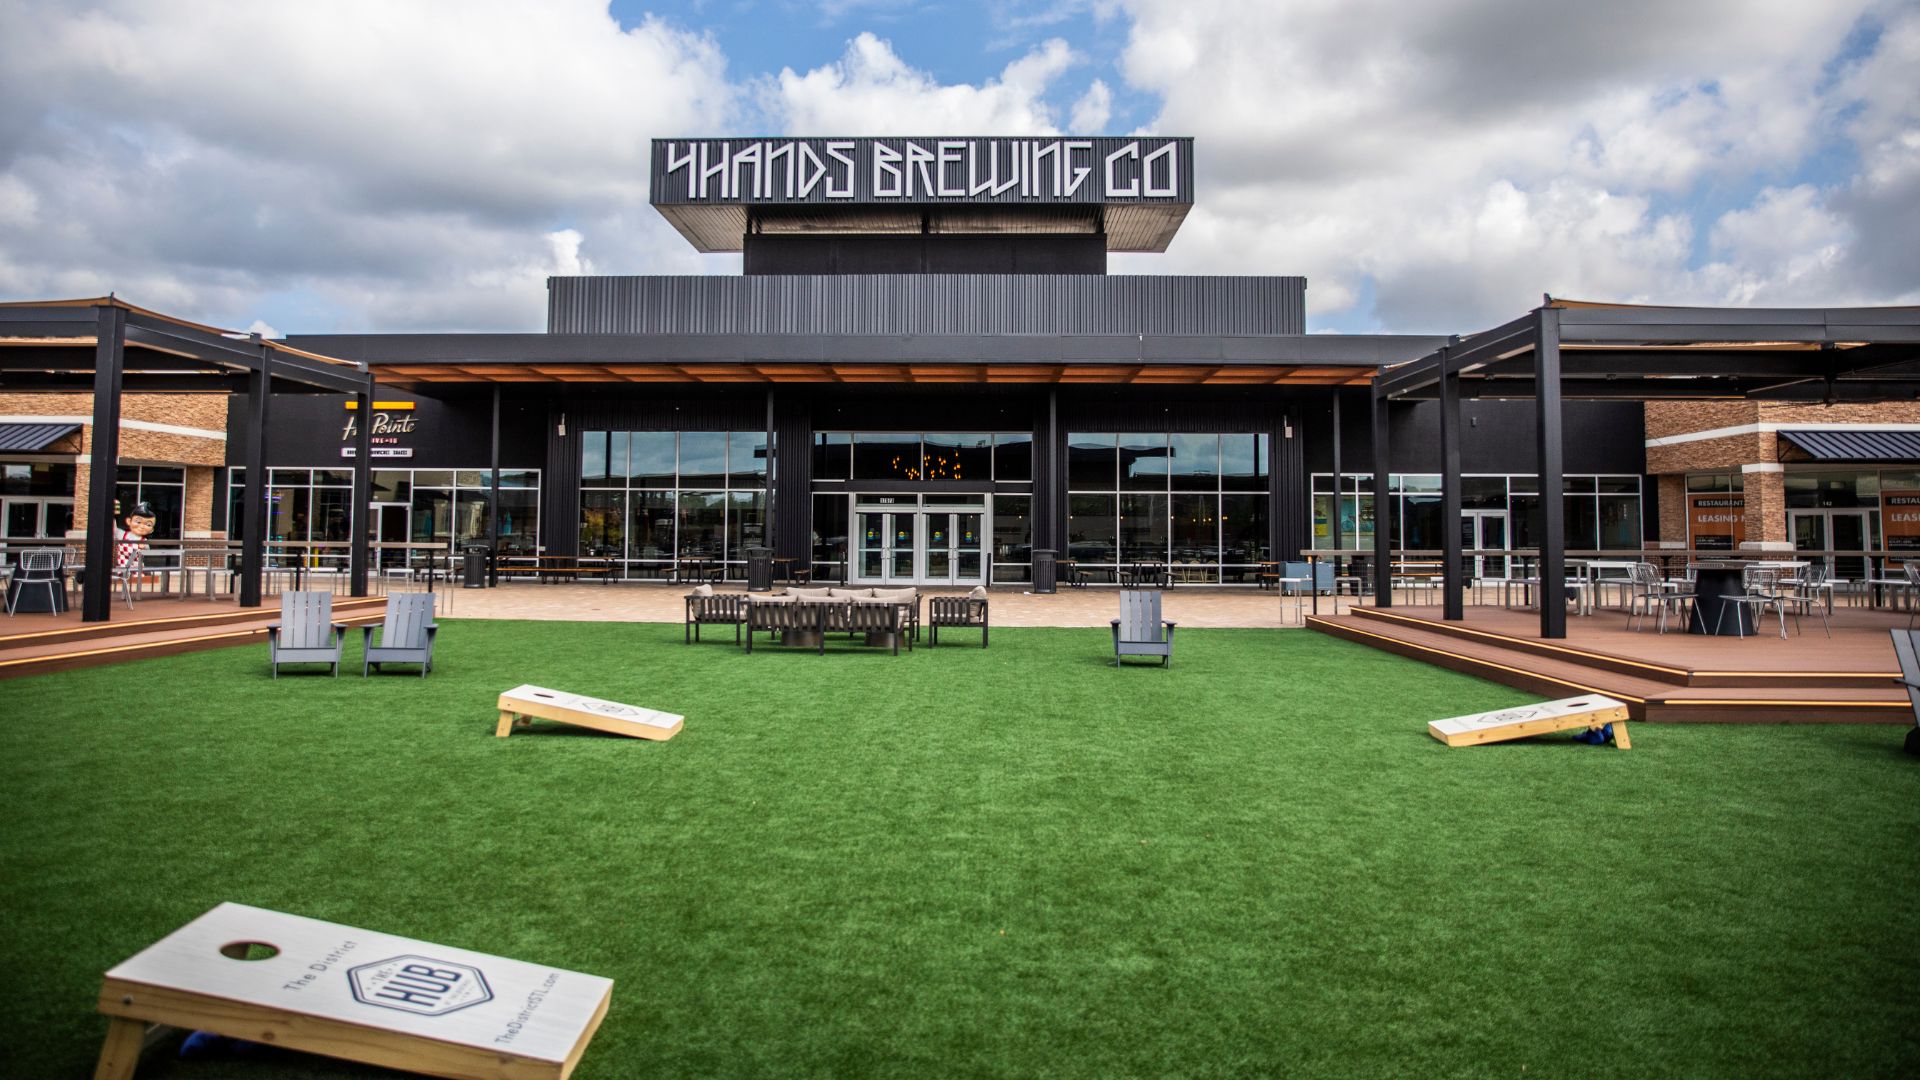 4 Hands Brewing Co. in Chesterfield offers a great outdoor space with an enormous TV, lawn games and more.